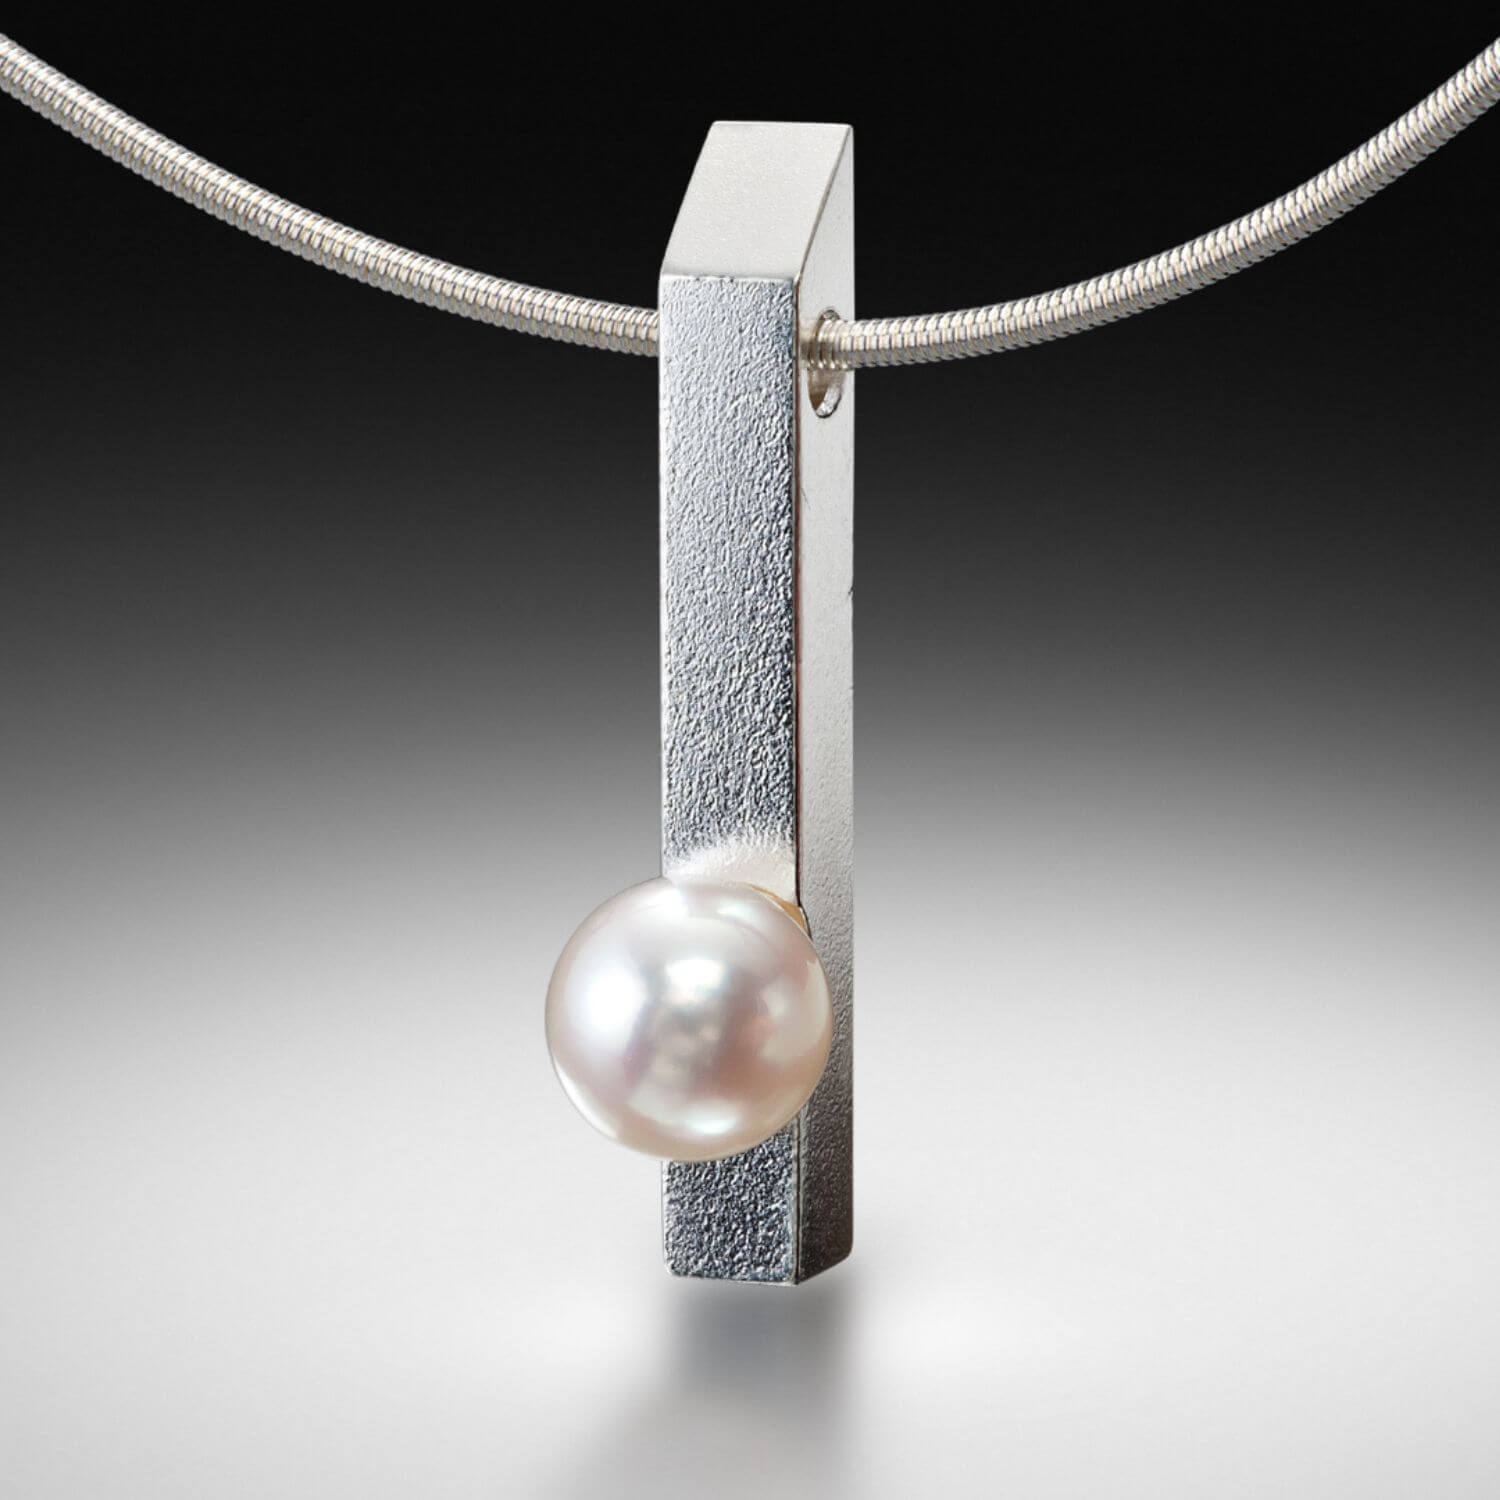 A close-up view of Estelle Vernon's elegant pearl jewelry collection, embodying timeless simplicity.